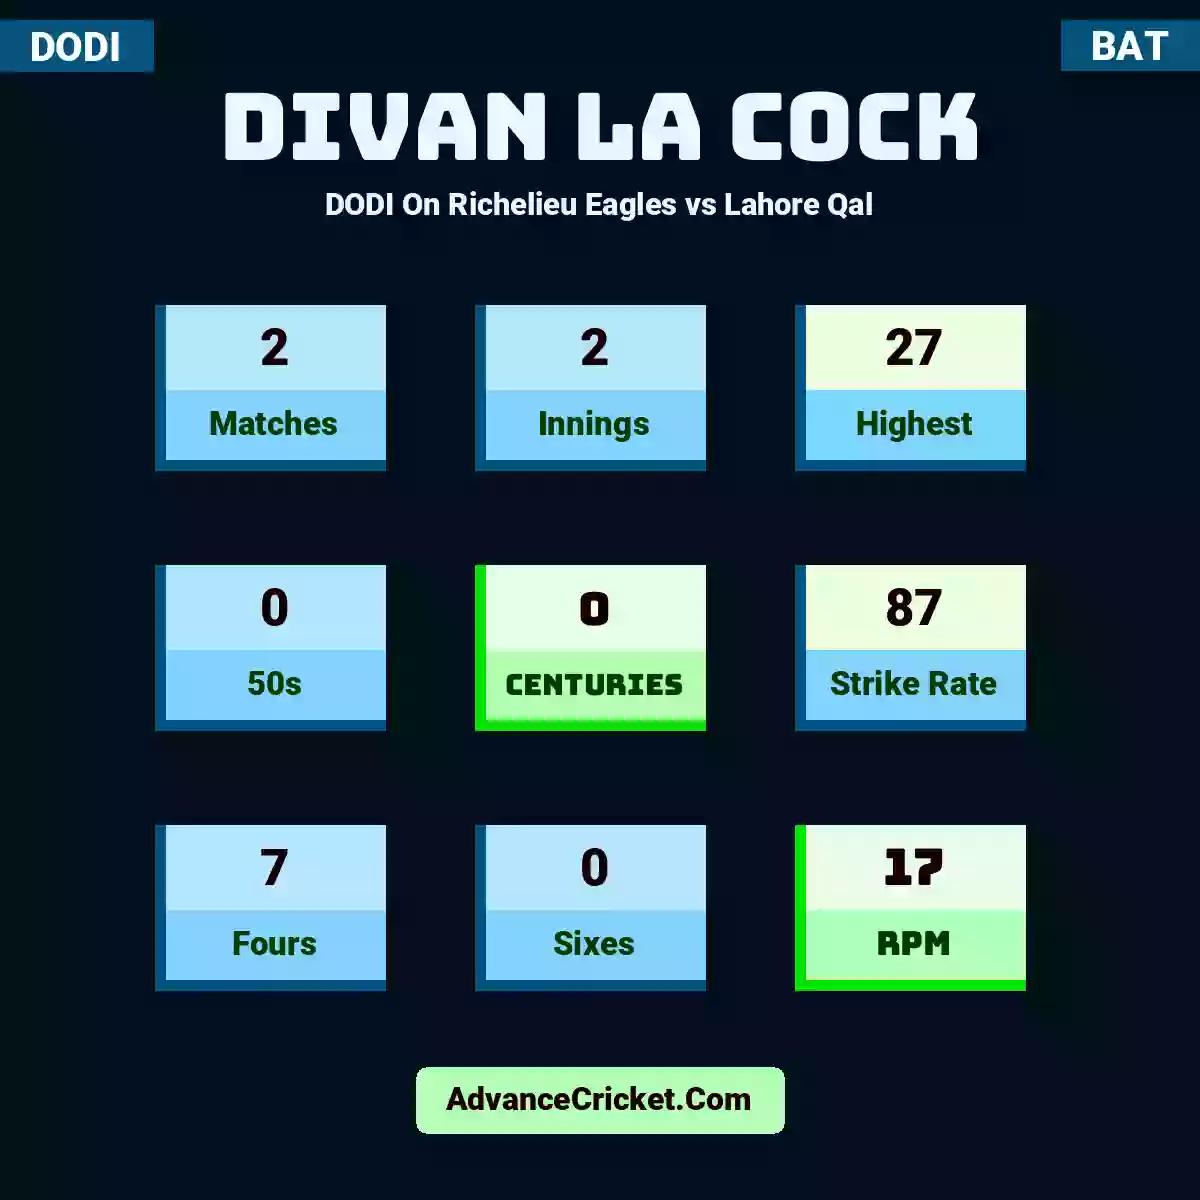 Divan la Cock DODI  On Richelieu Eagles vs Lahore Qal, Divan la Cock played 2 matches, scored 27 runs as highest, 0 half-centuries, and 0 centuries, with a strike rate of 87. D.Cock hit 7 fours and 0 sixes, with an RPM of 17.